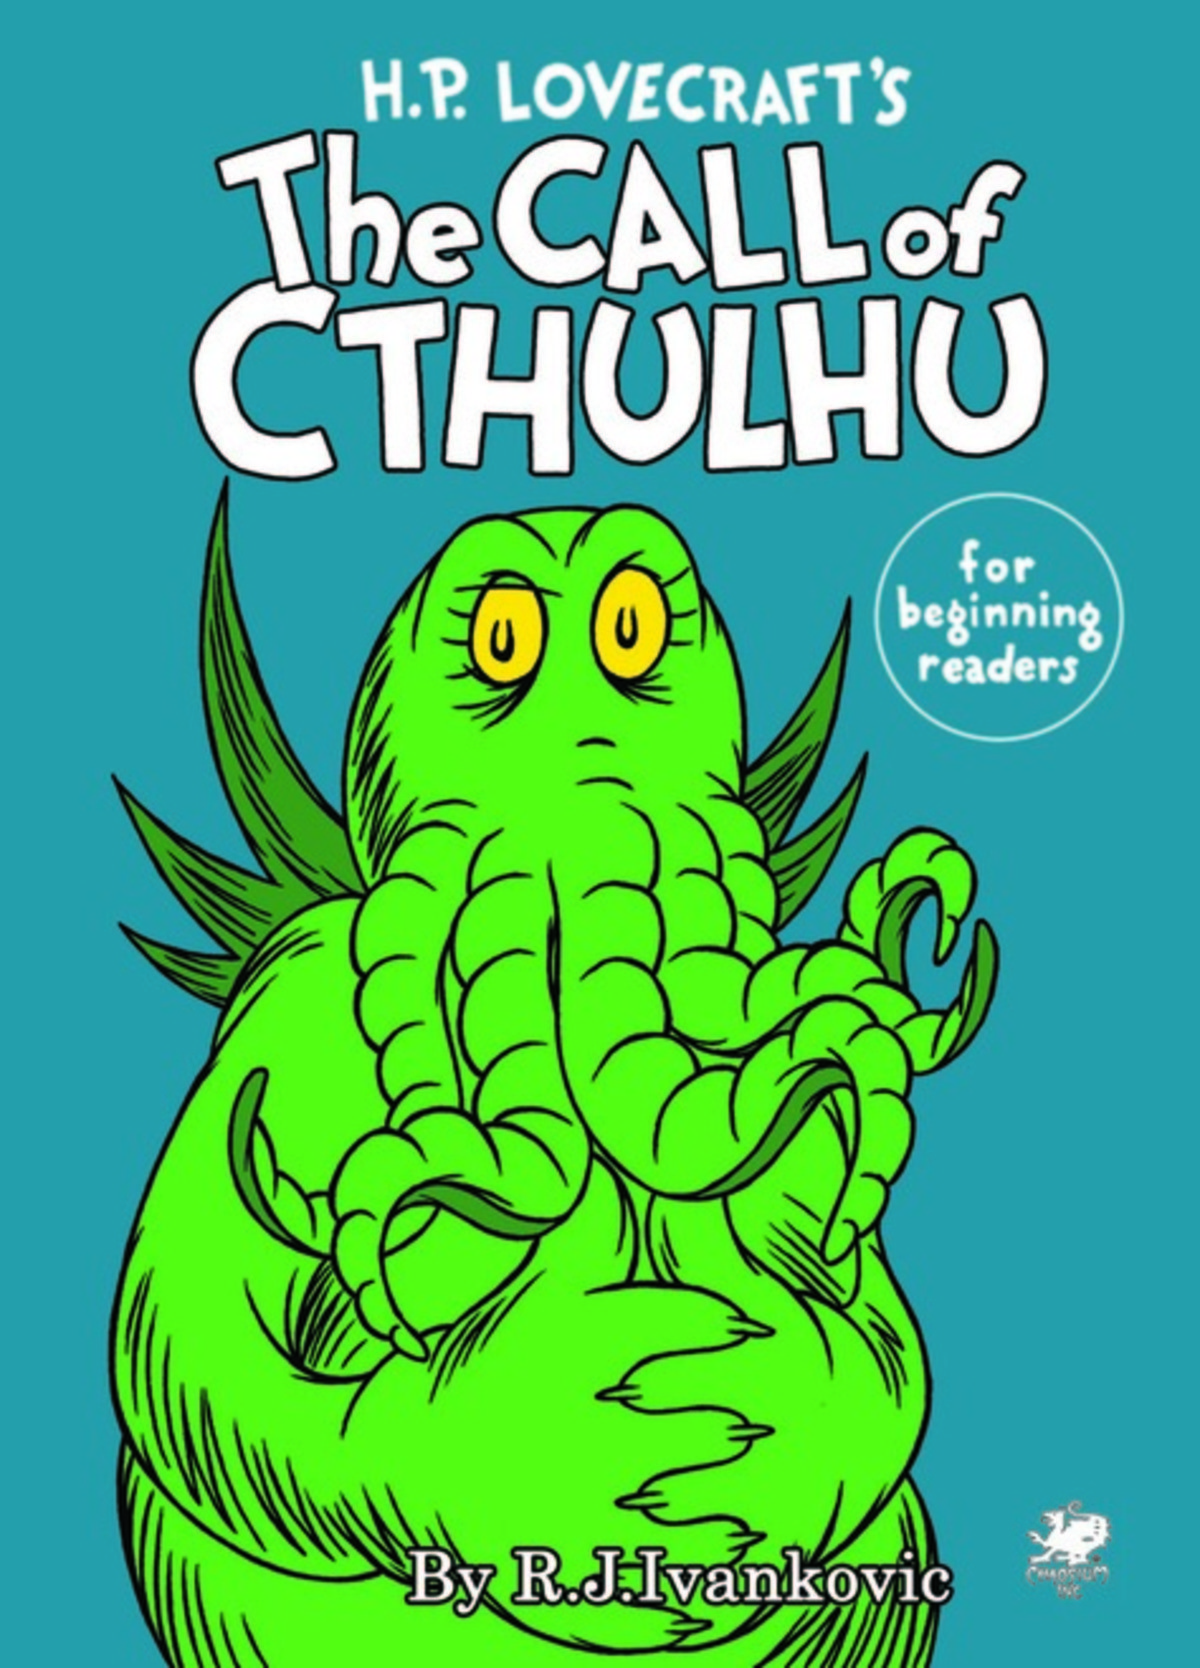 Call of Cthulhu is out now. ofCthulhu/ join list: SnortingVideogames (124 subs)Mention History.. ah yeah nice too bad i'll never be able to play it because there's no way i can throw 45€ on game without going broke